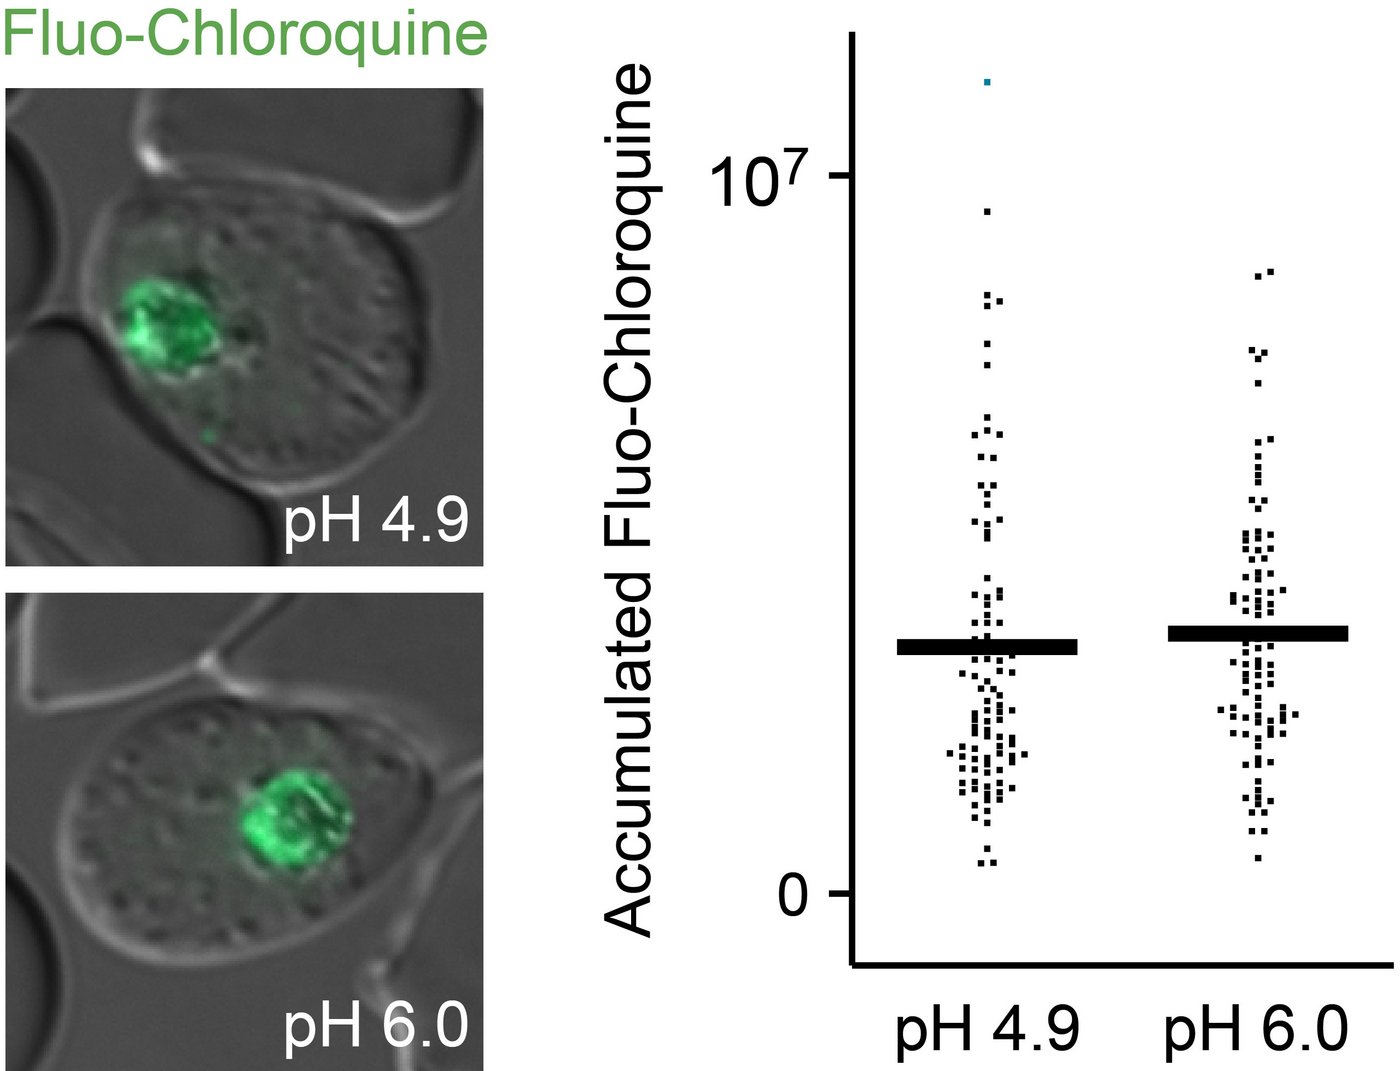 The grey-green electron microscope image and the graph to the right show: Increasing the pH of the food vacuole by inhibiting V-ATPase has no effect on vacuolar drug uptake. Live parasites and accumulated fluorescently labelled chloroquine (green) in the parasite are shown. Irrespective of the vacuolar pH, fluo-chloroquine is efficiently taken up into the food vacuole.